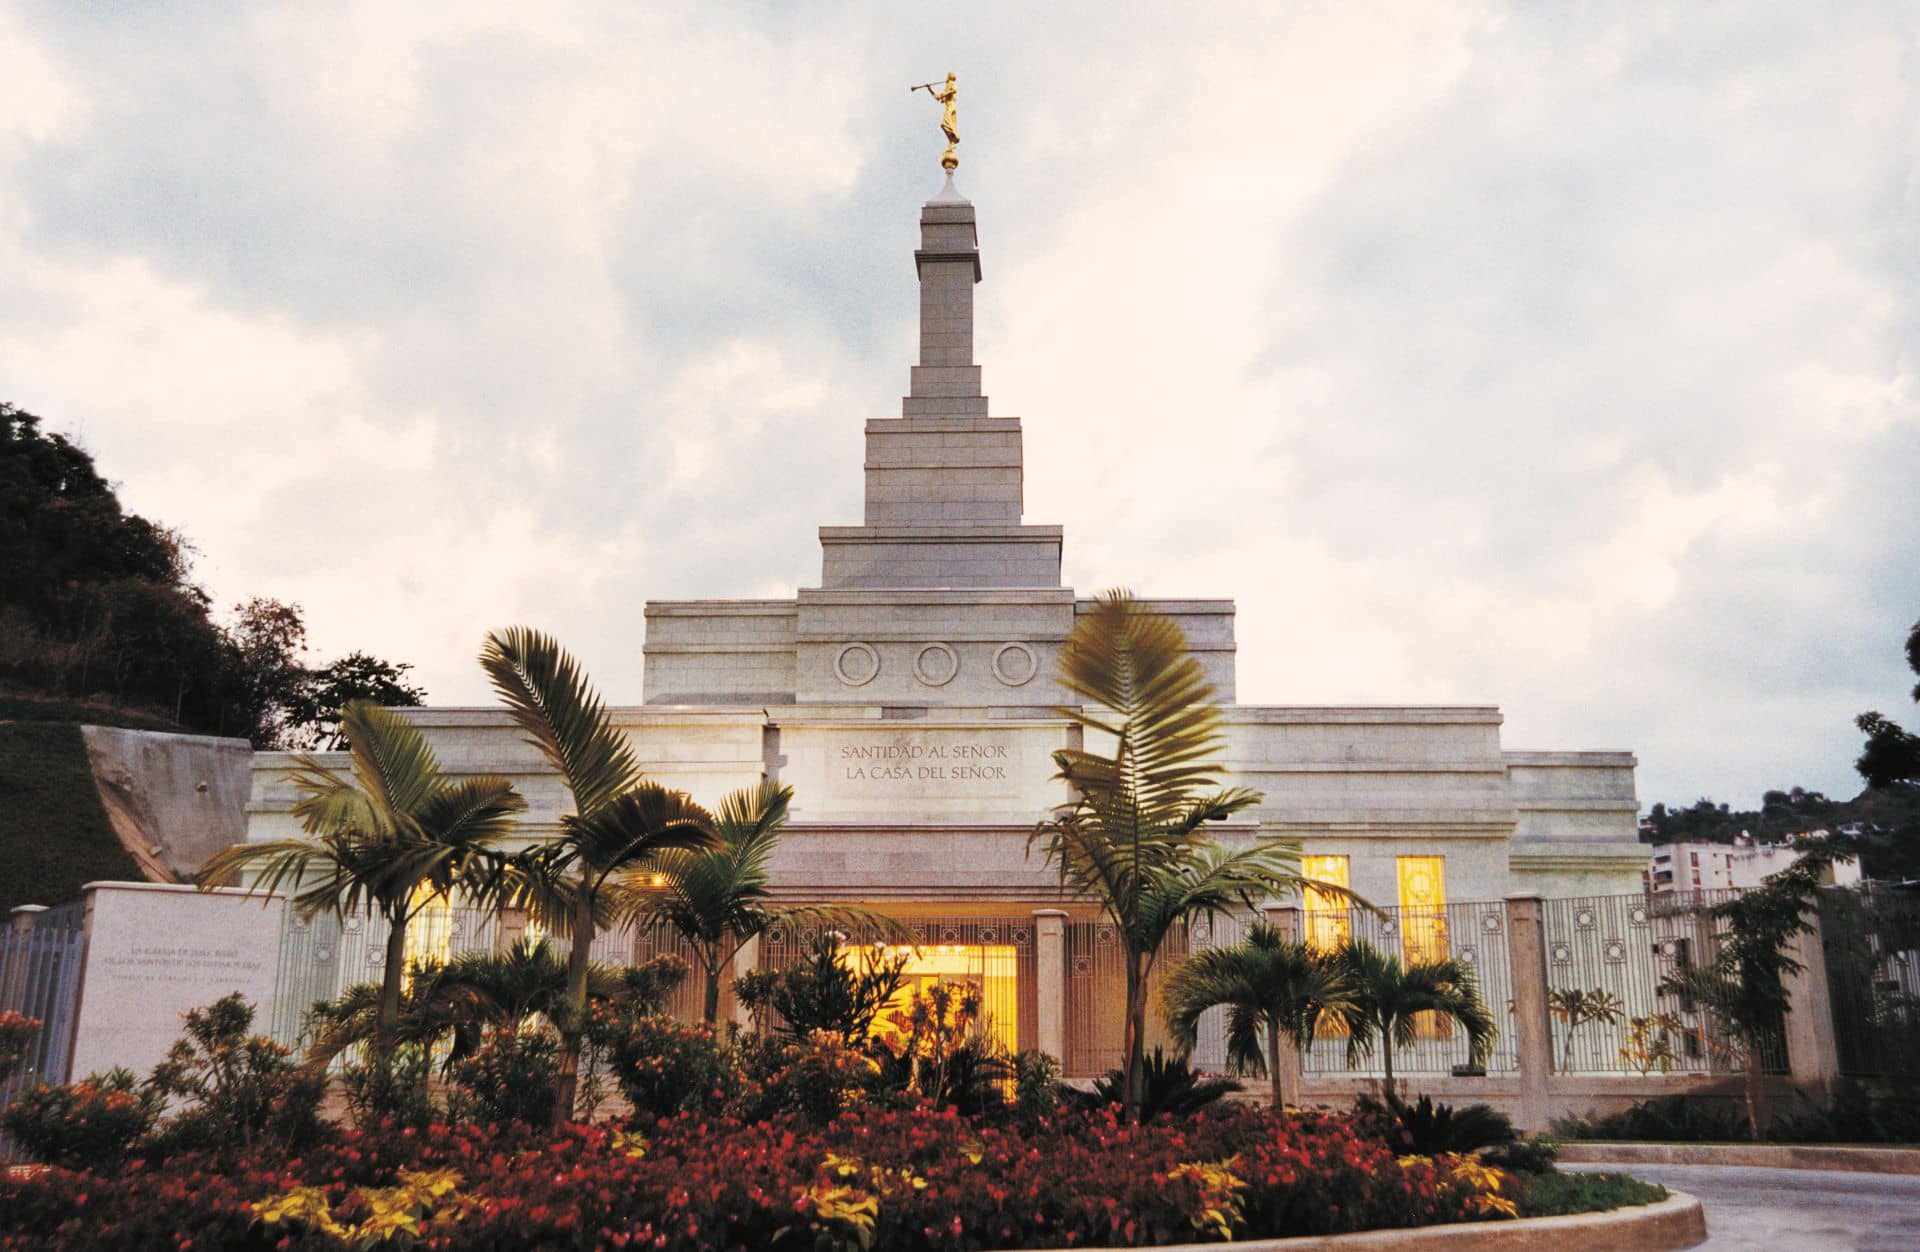 The Caracas Venezuela Temple, a white building with a steeple topped by a golden statue of an angel blowing a trumpet.